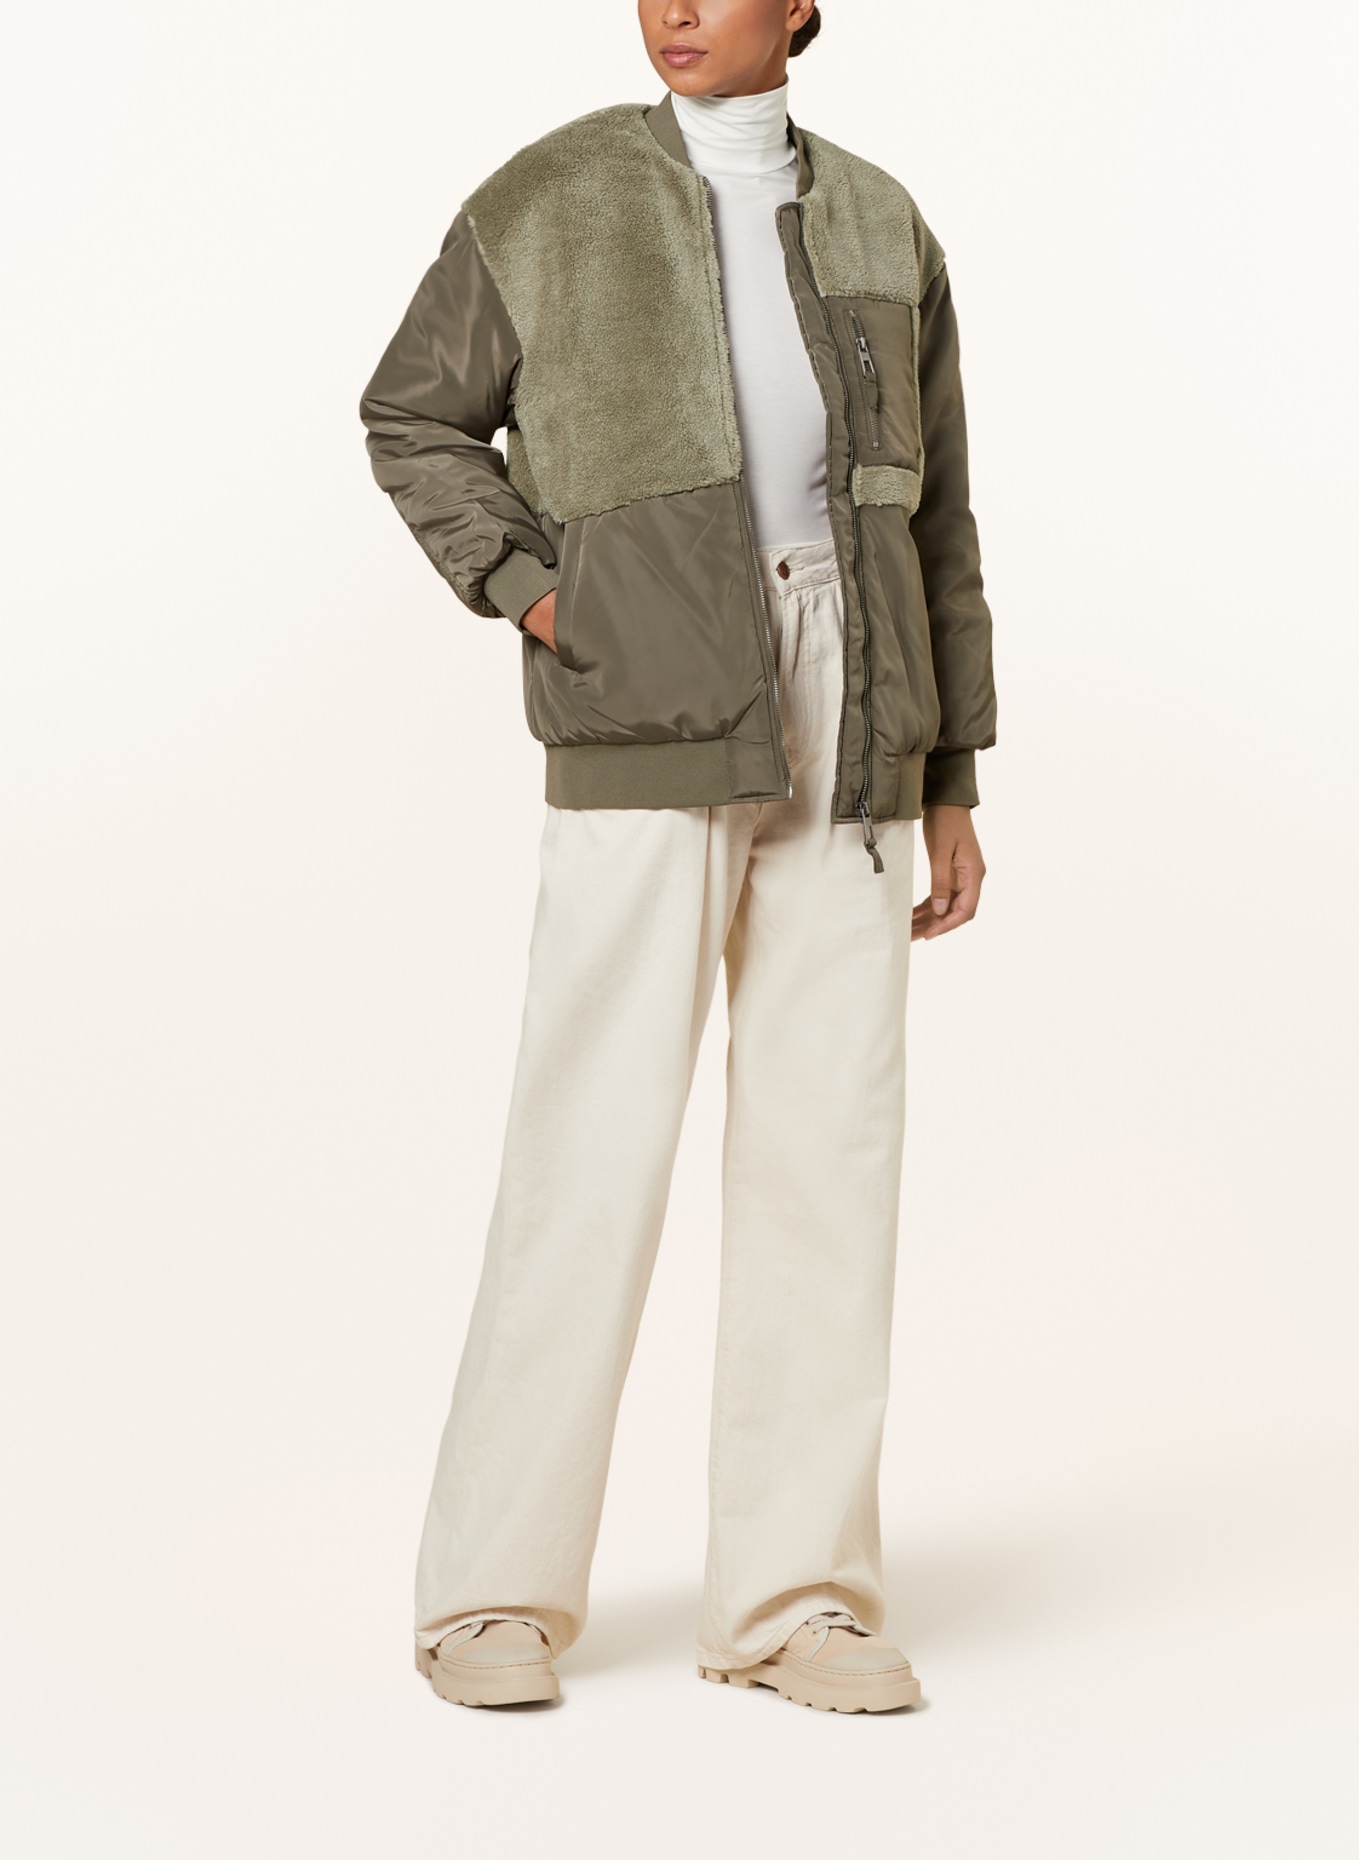 ONLY Bomber jacket in mixed materials, Color: LIGHT GREEN/ OLIVE (Image 2)